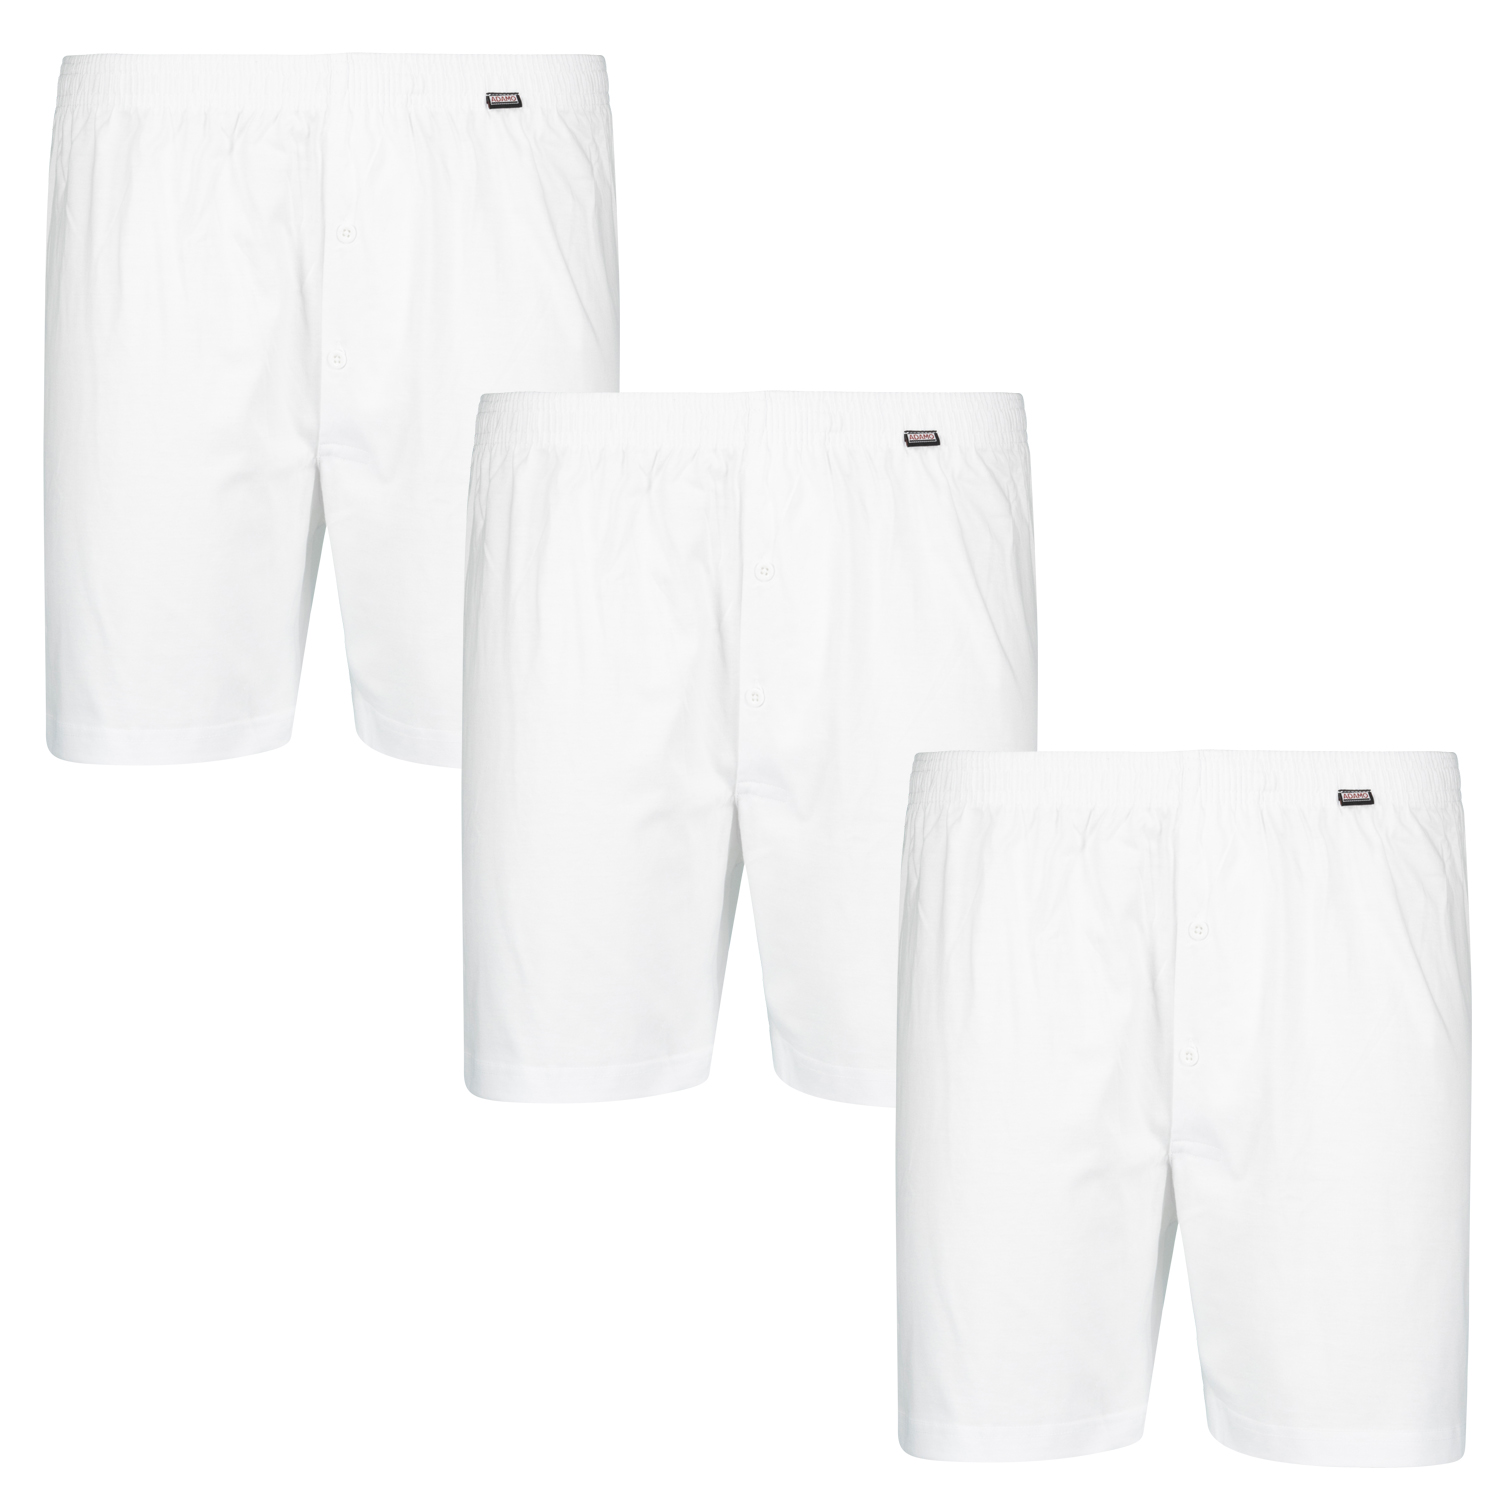 White triple pack "JAMES" boxershorts by ADAMO in large sizes up to 20